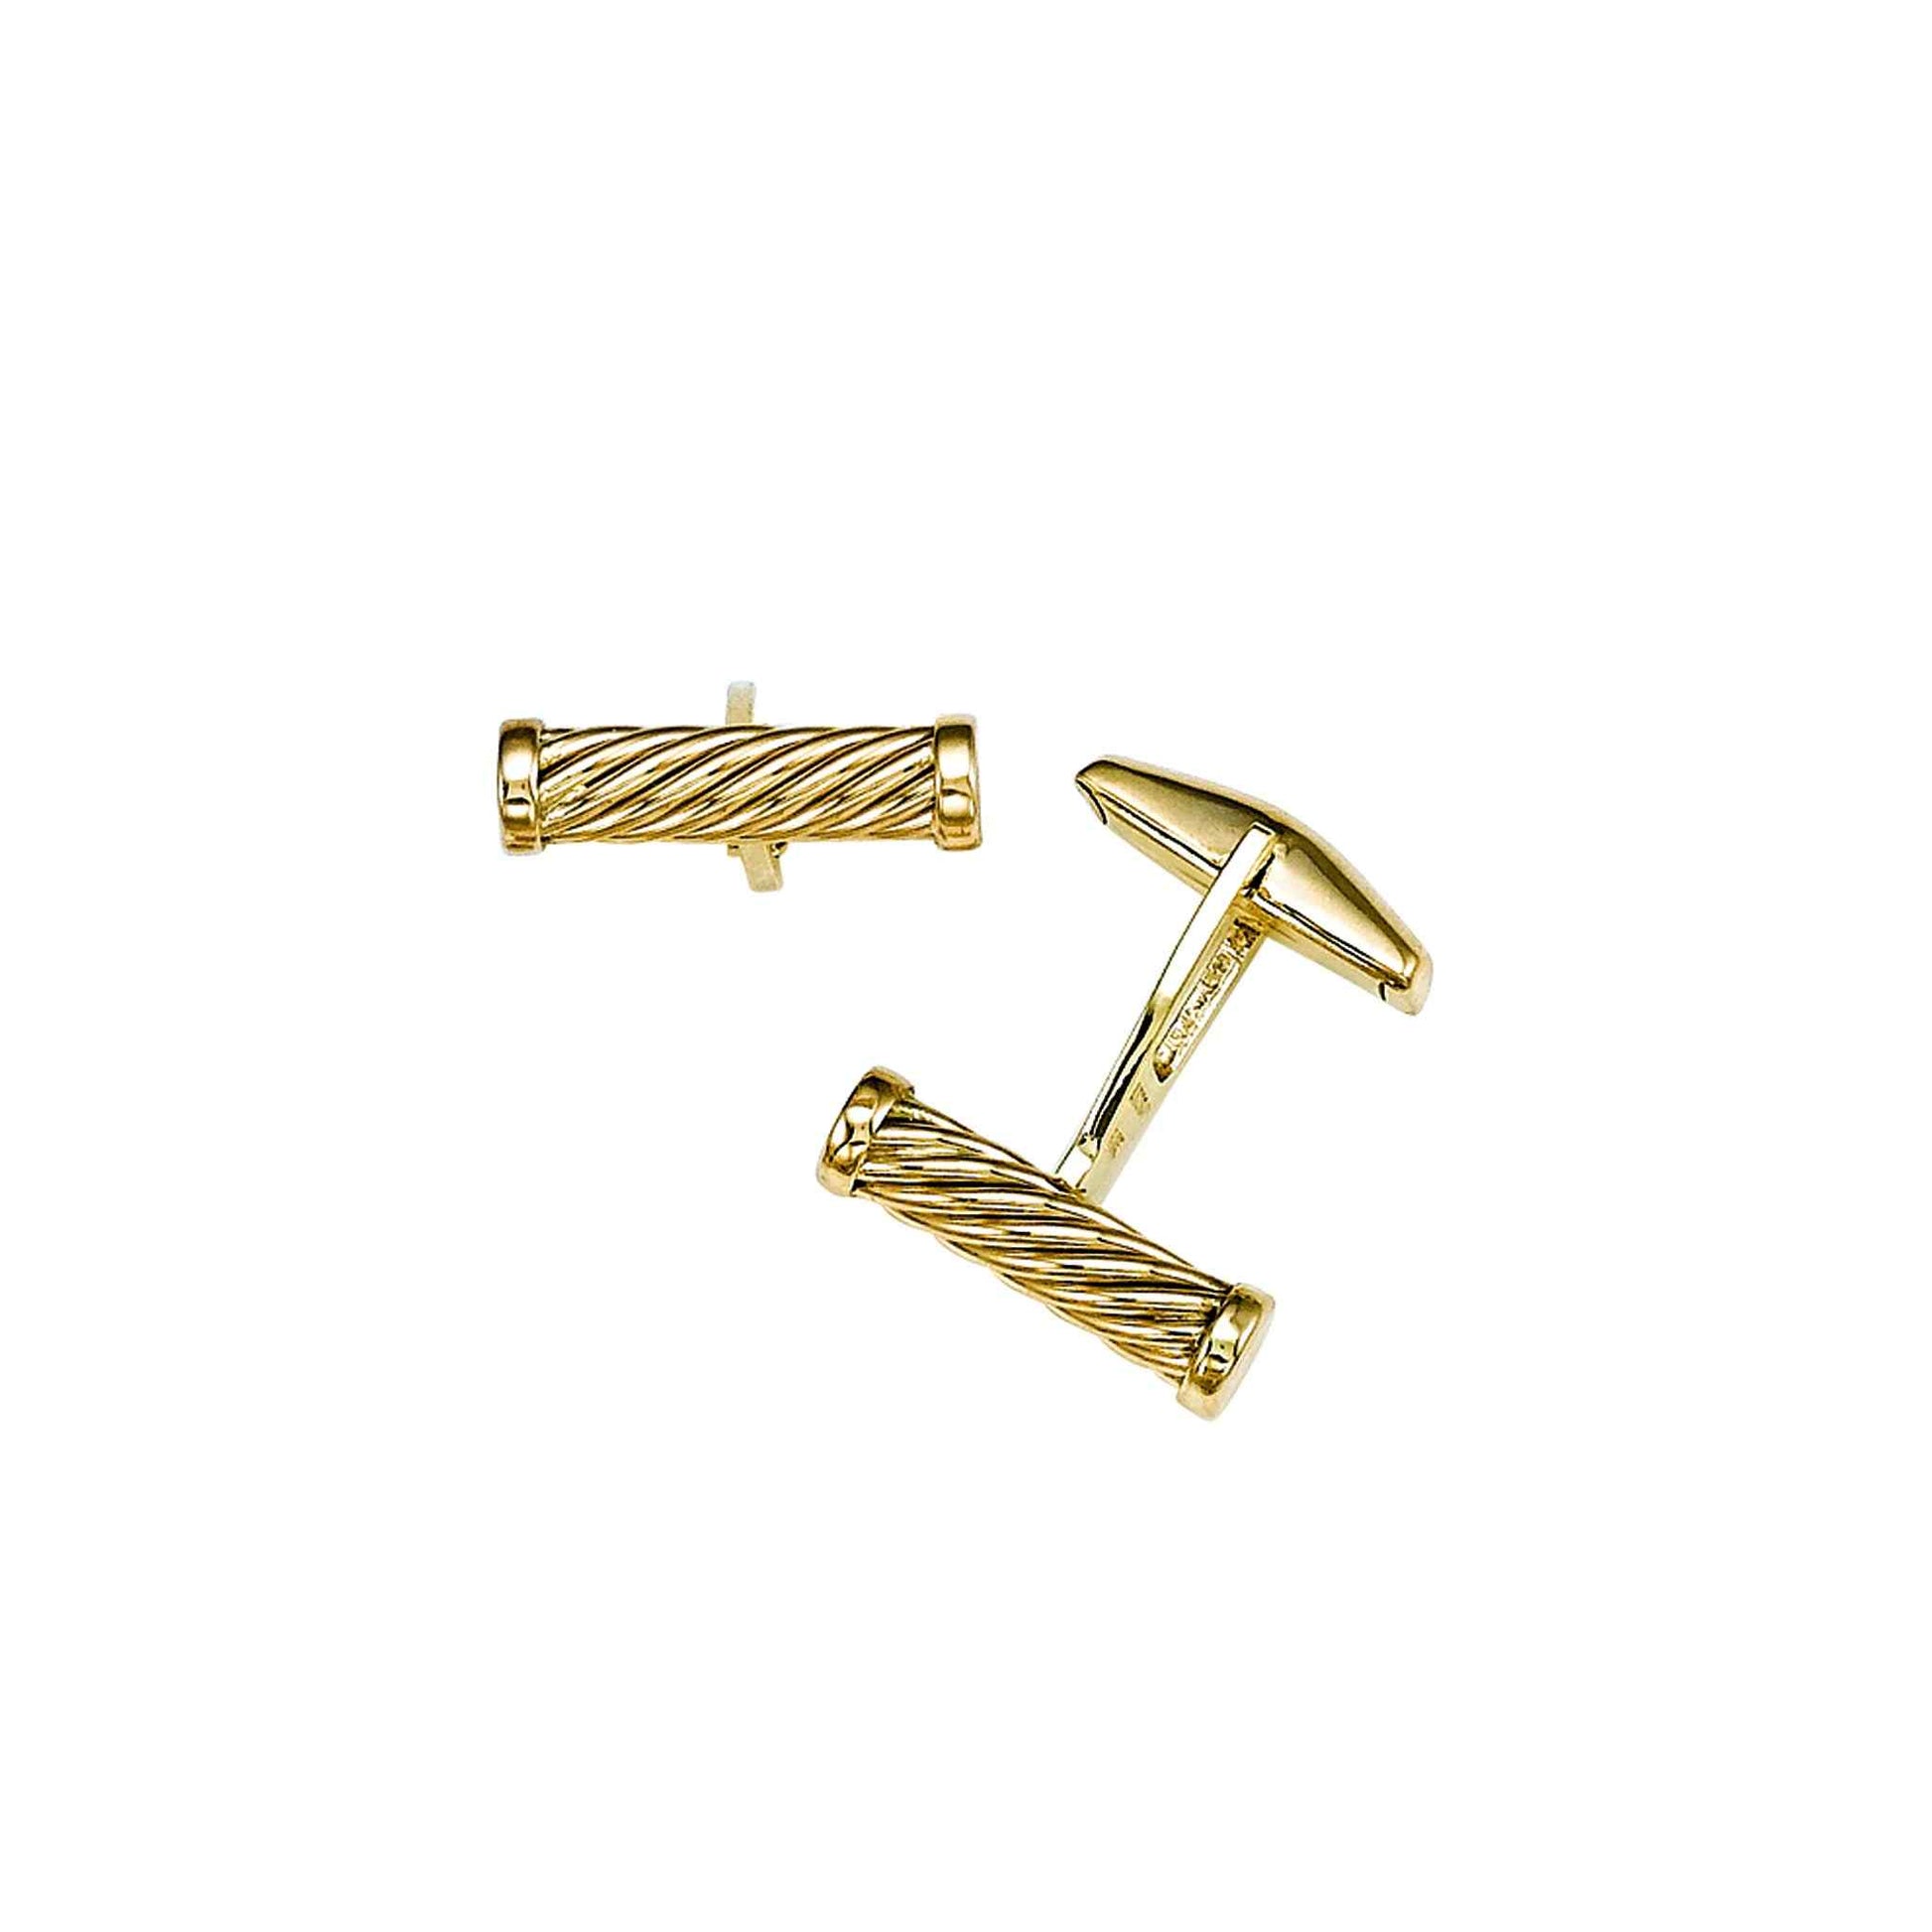 A 14k yellow gold single twist cufflinks displayed on a neutral white background.